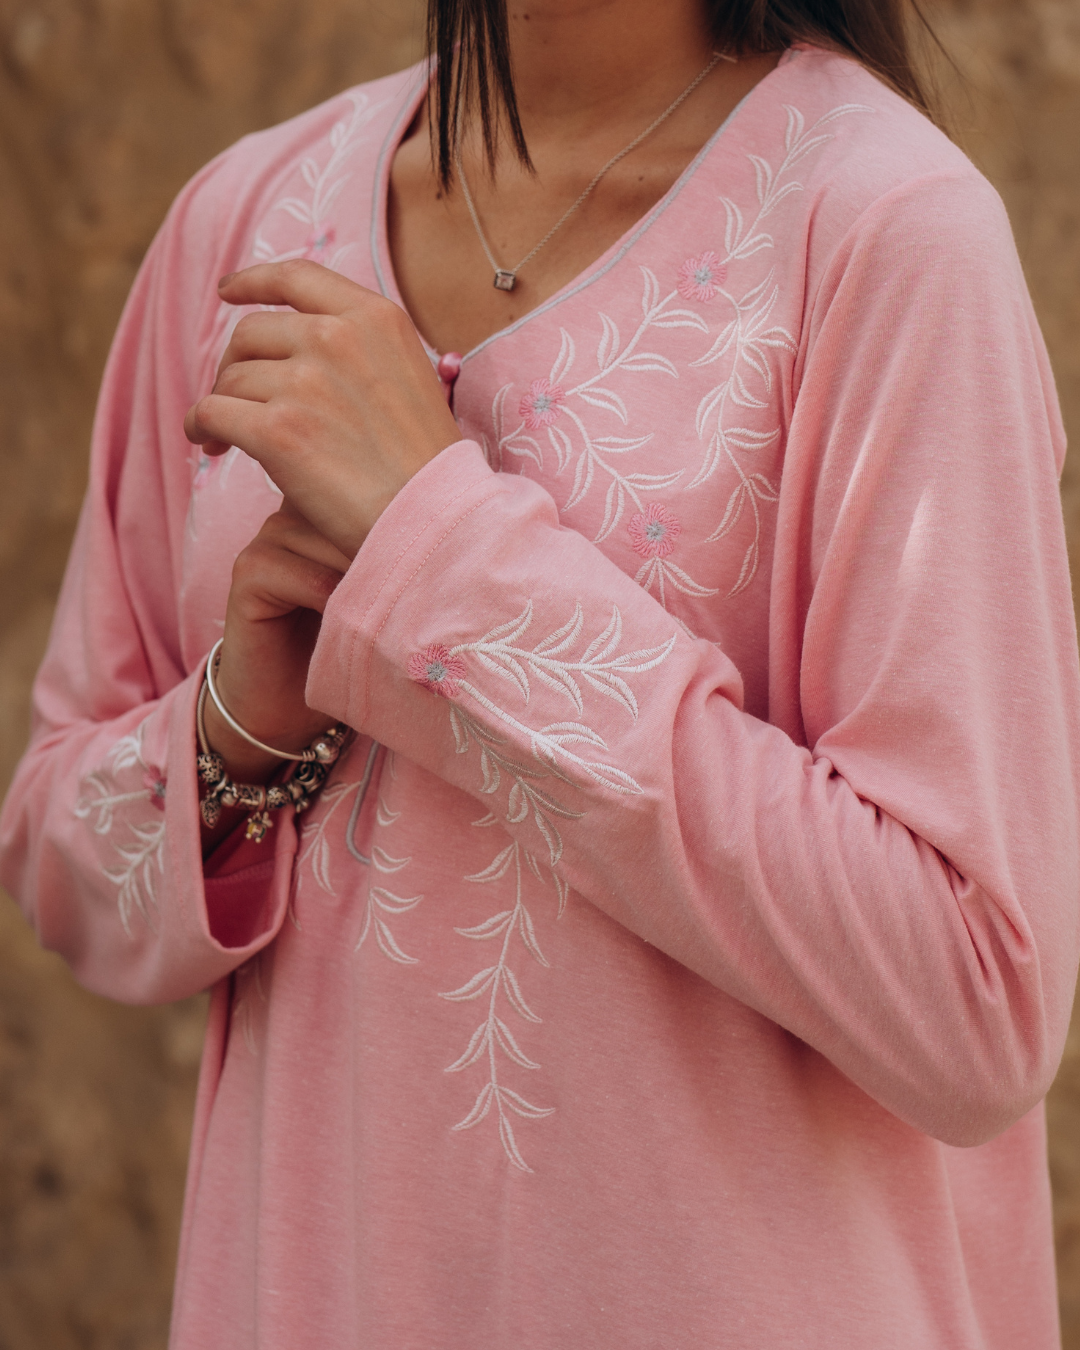 Women's shirt with rhubarb sleeves, buttons embroidered with branches